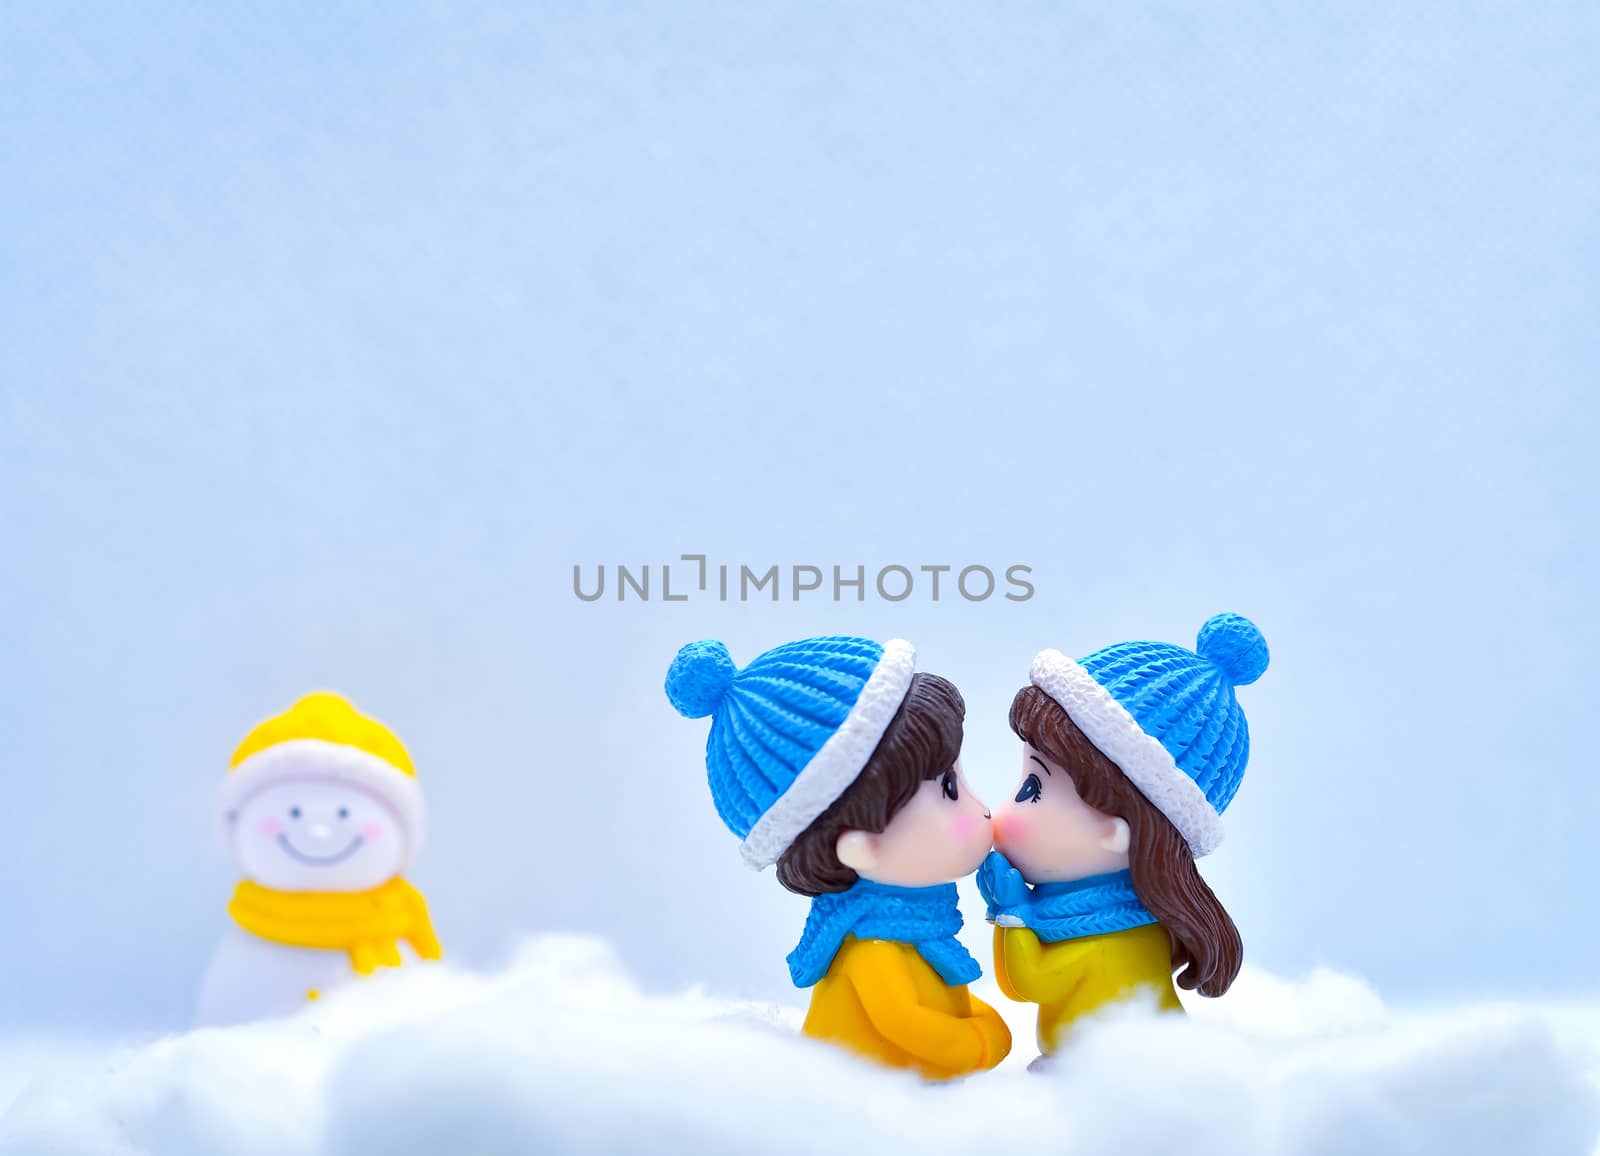 Tourism and travel concept: Miniature people kissing each other in winter snow with little snowman in the background